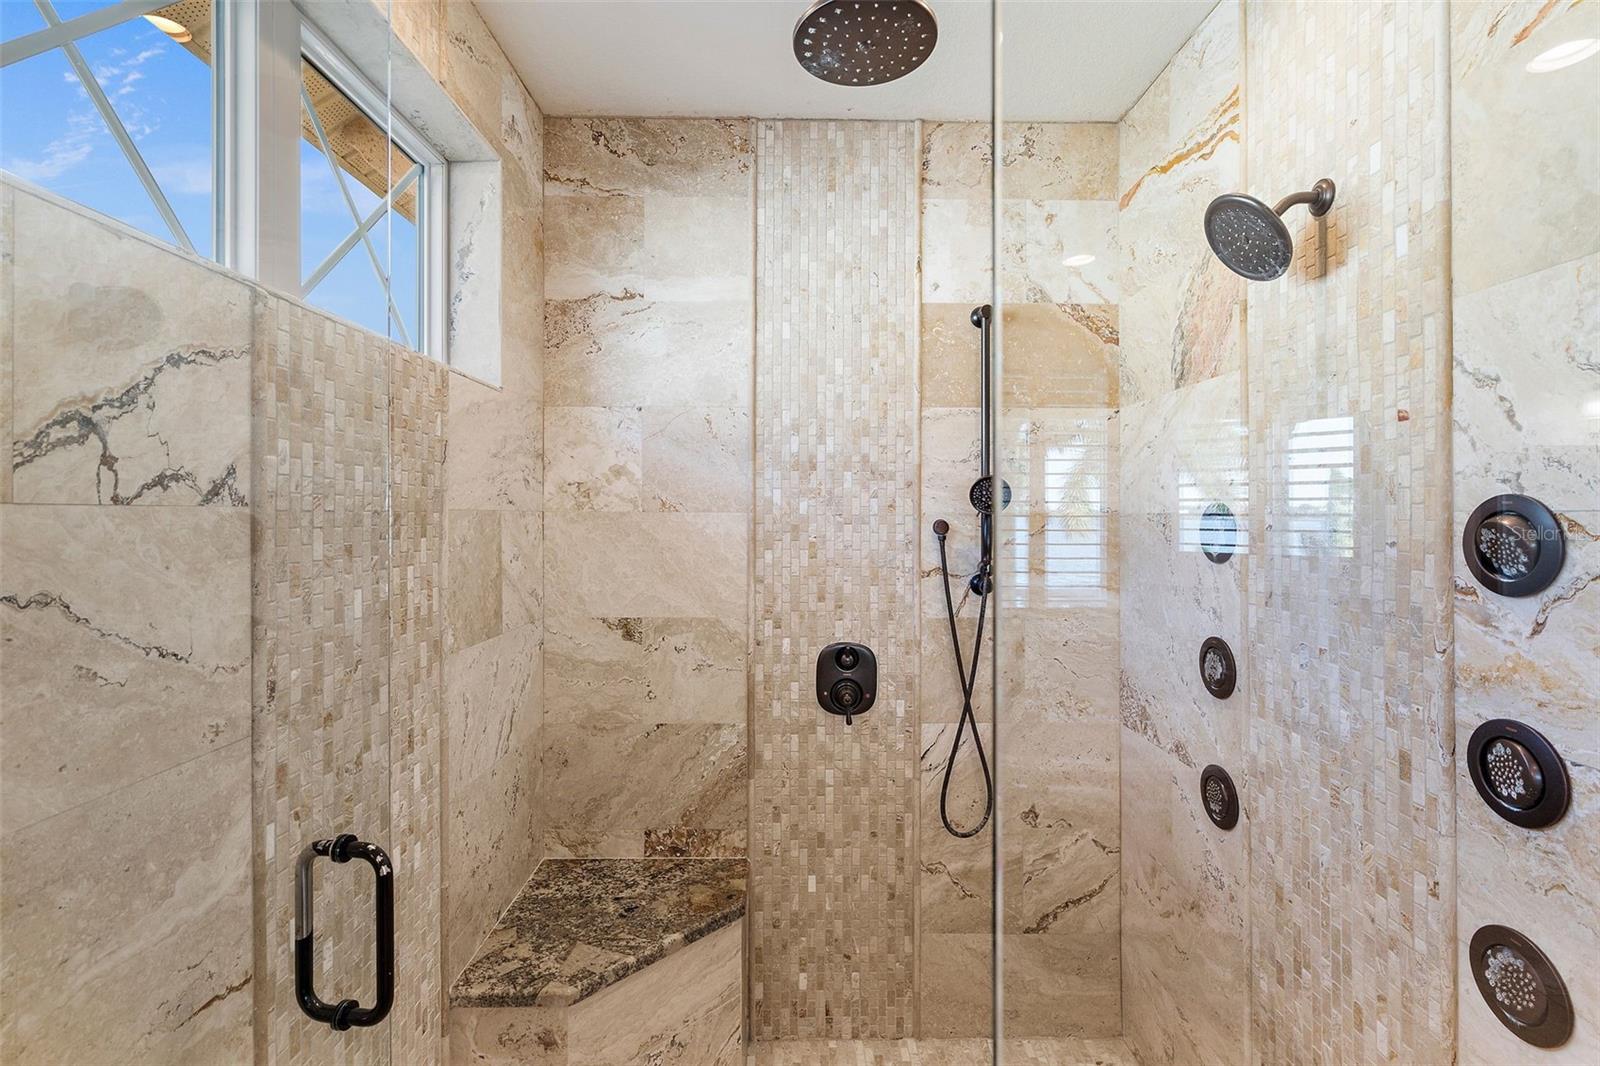 Walk in shower with multiple shower heads